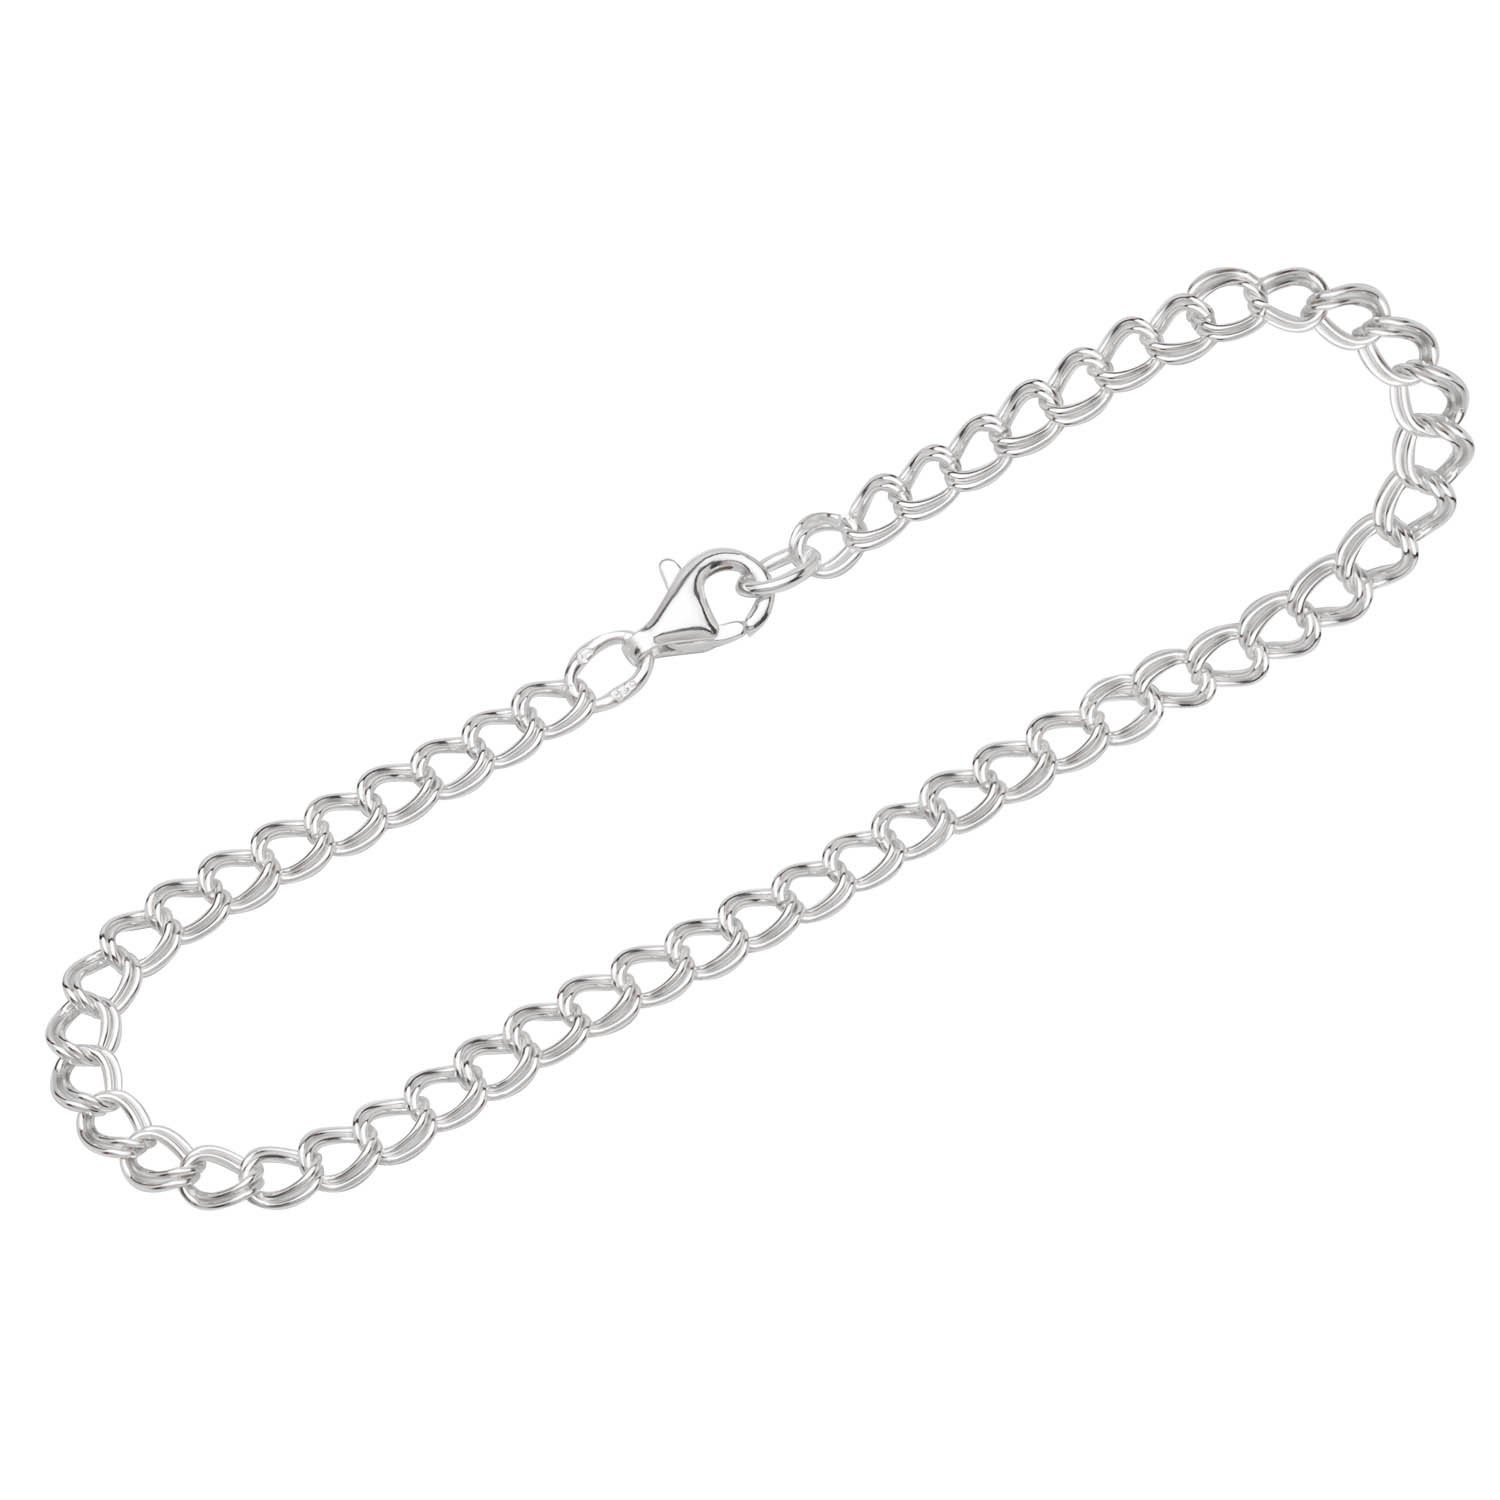 Made Silber Silberarmband 19cm Panzer NKlaus 925 (1 Sterling Armband Stück), Zwillings Germany in